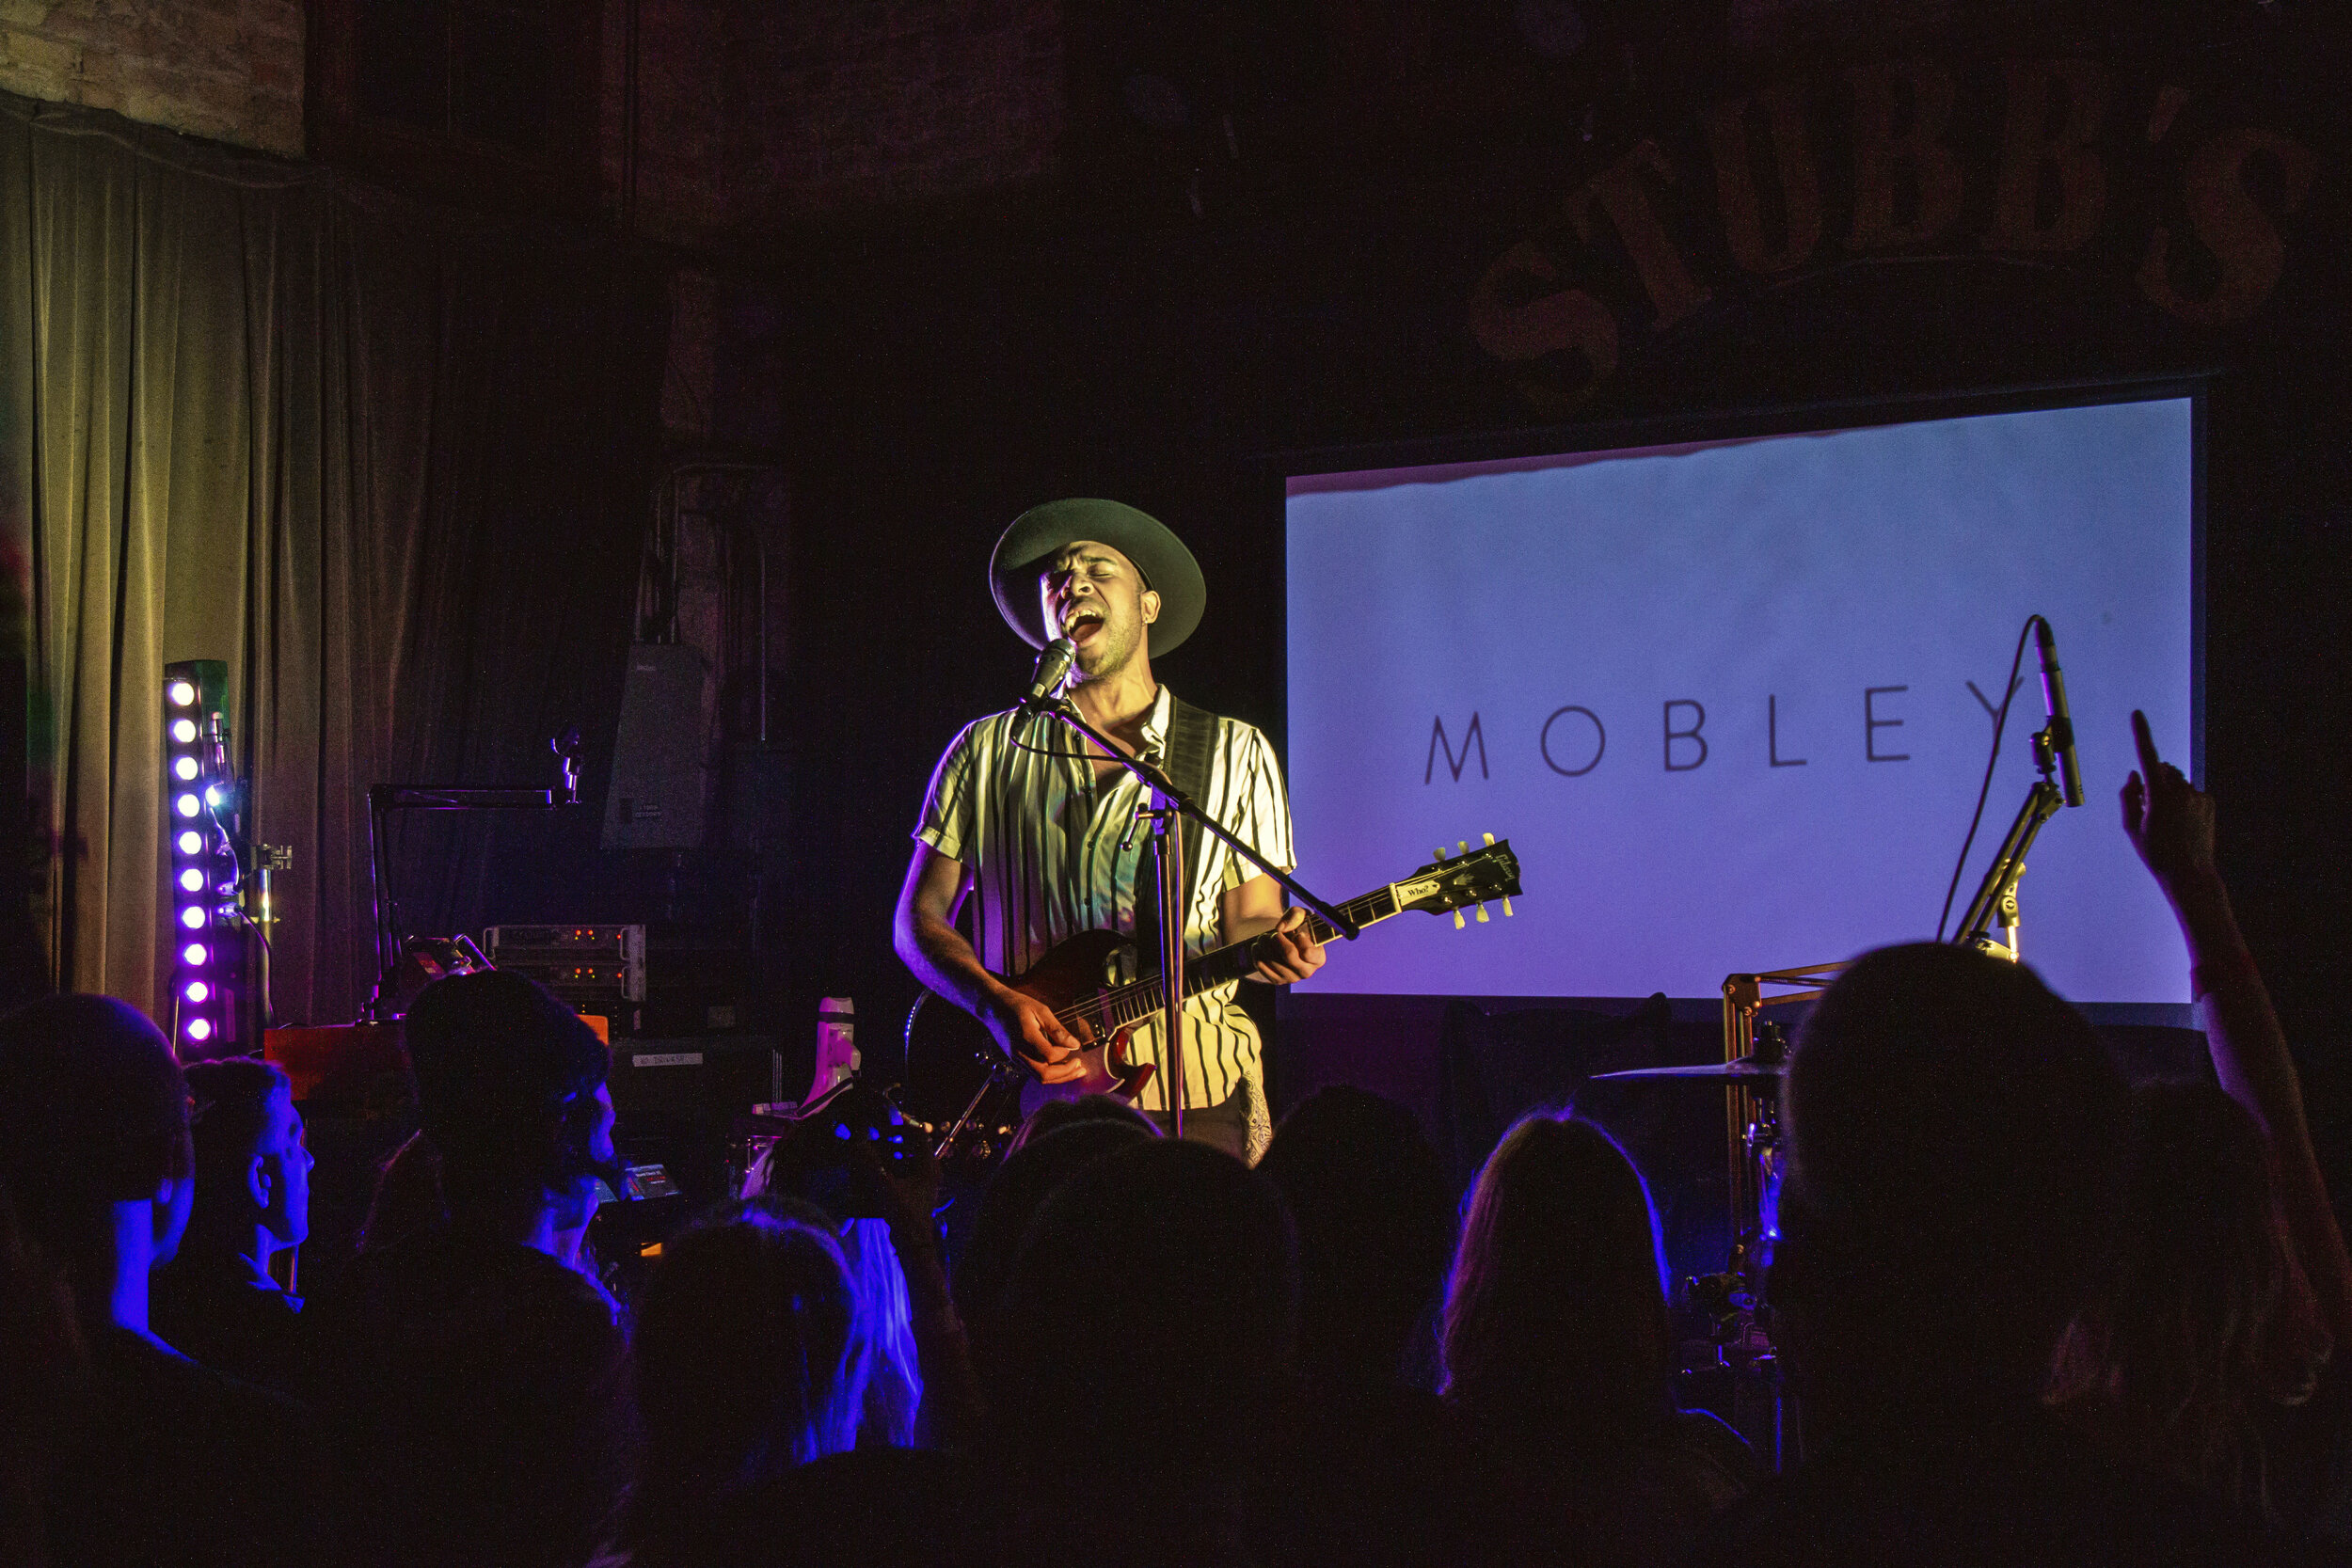  Mobley performs at Stubbs on Oct 11 following the first day of ACL weekend two. 